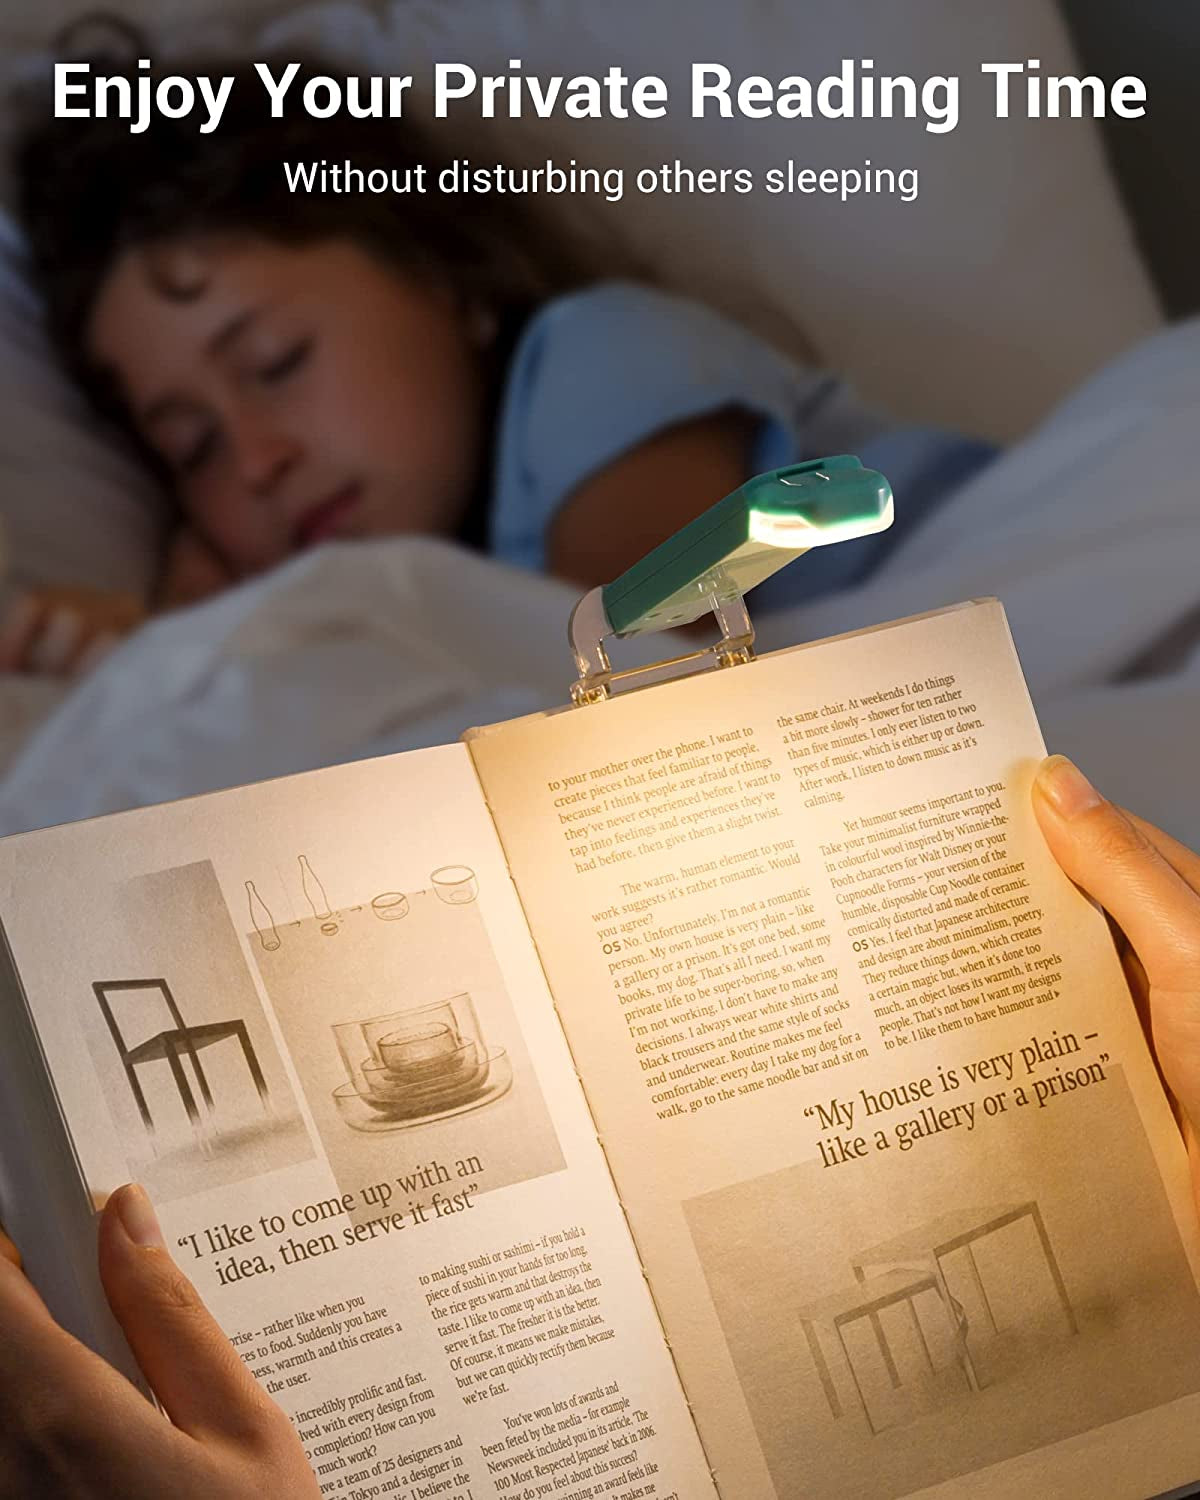 Book Reading Light with Clip, USB Rechargeble Booklight for Reading in Bed, Clip on Book Lamp, Brightness Adjustable, Sleep Aid Light, Warm White (Blue)